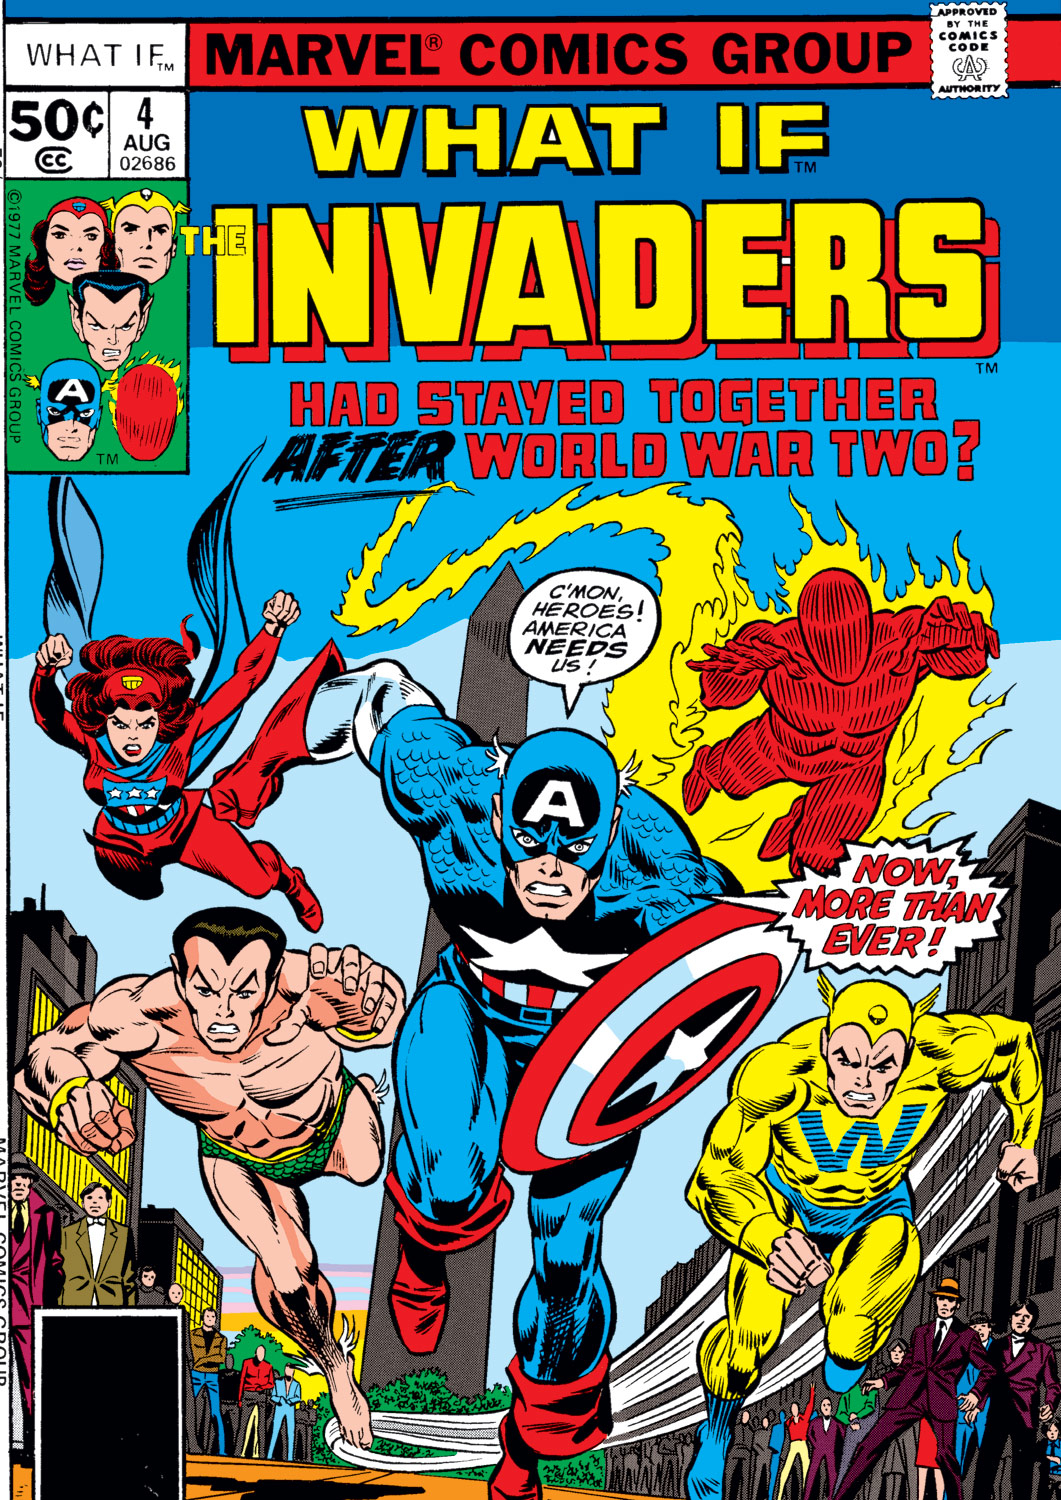 Read online What If? (1977) comic -  Issue #4 - The Invaders had stayed together after World War Two - 1